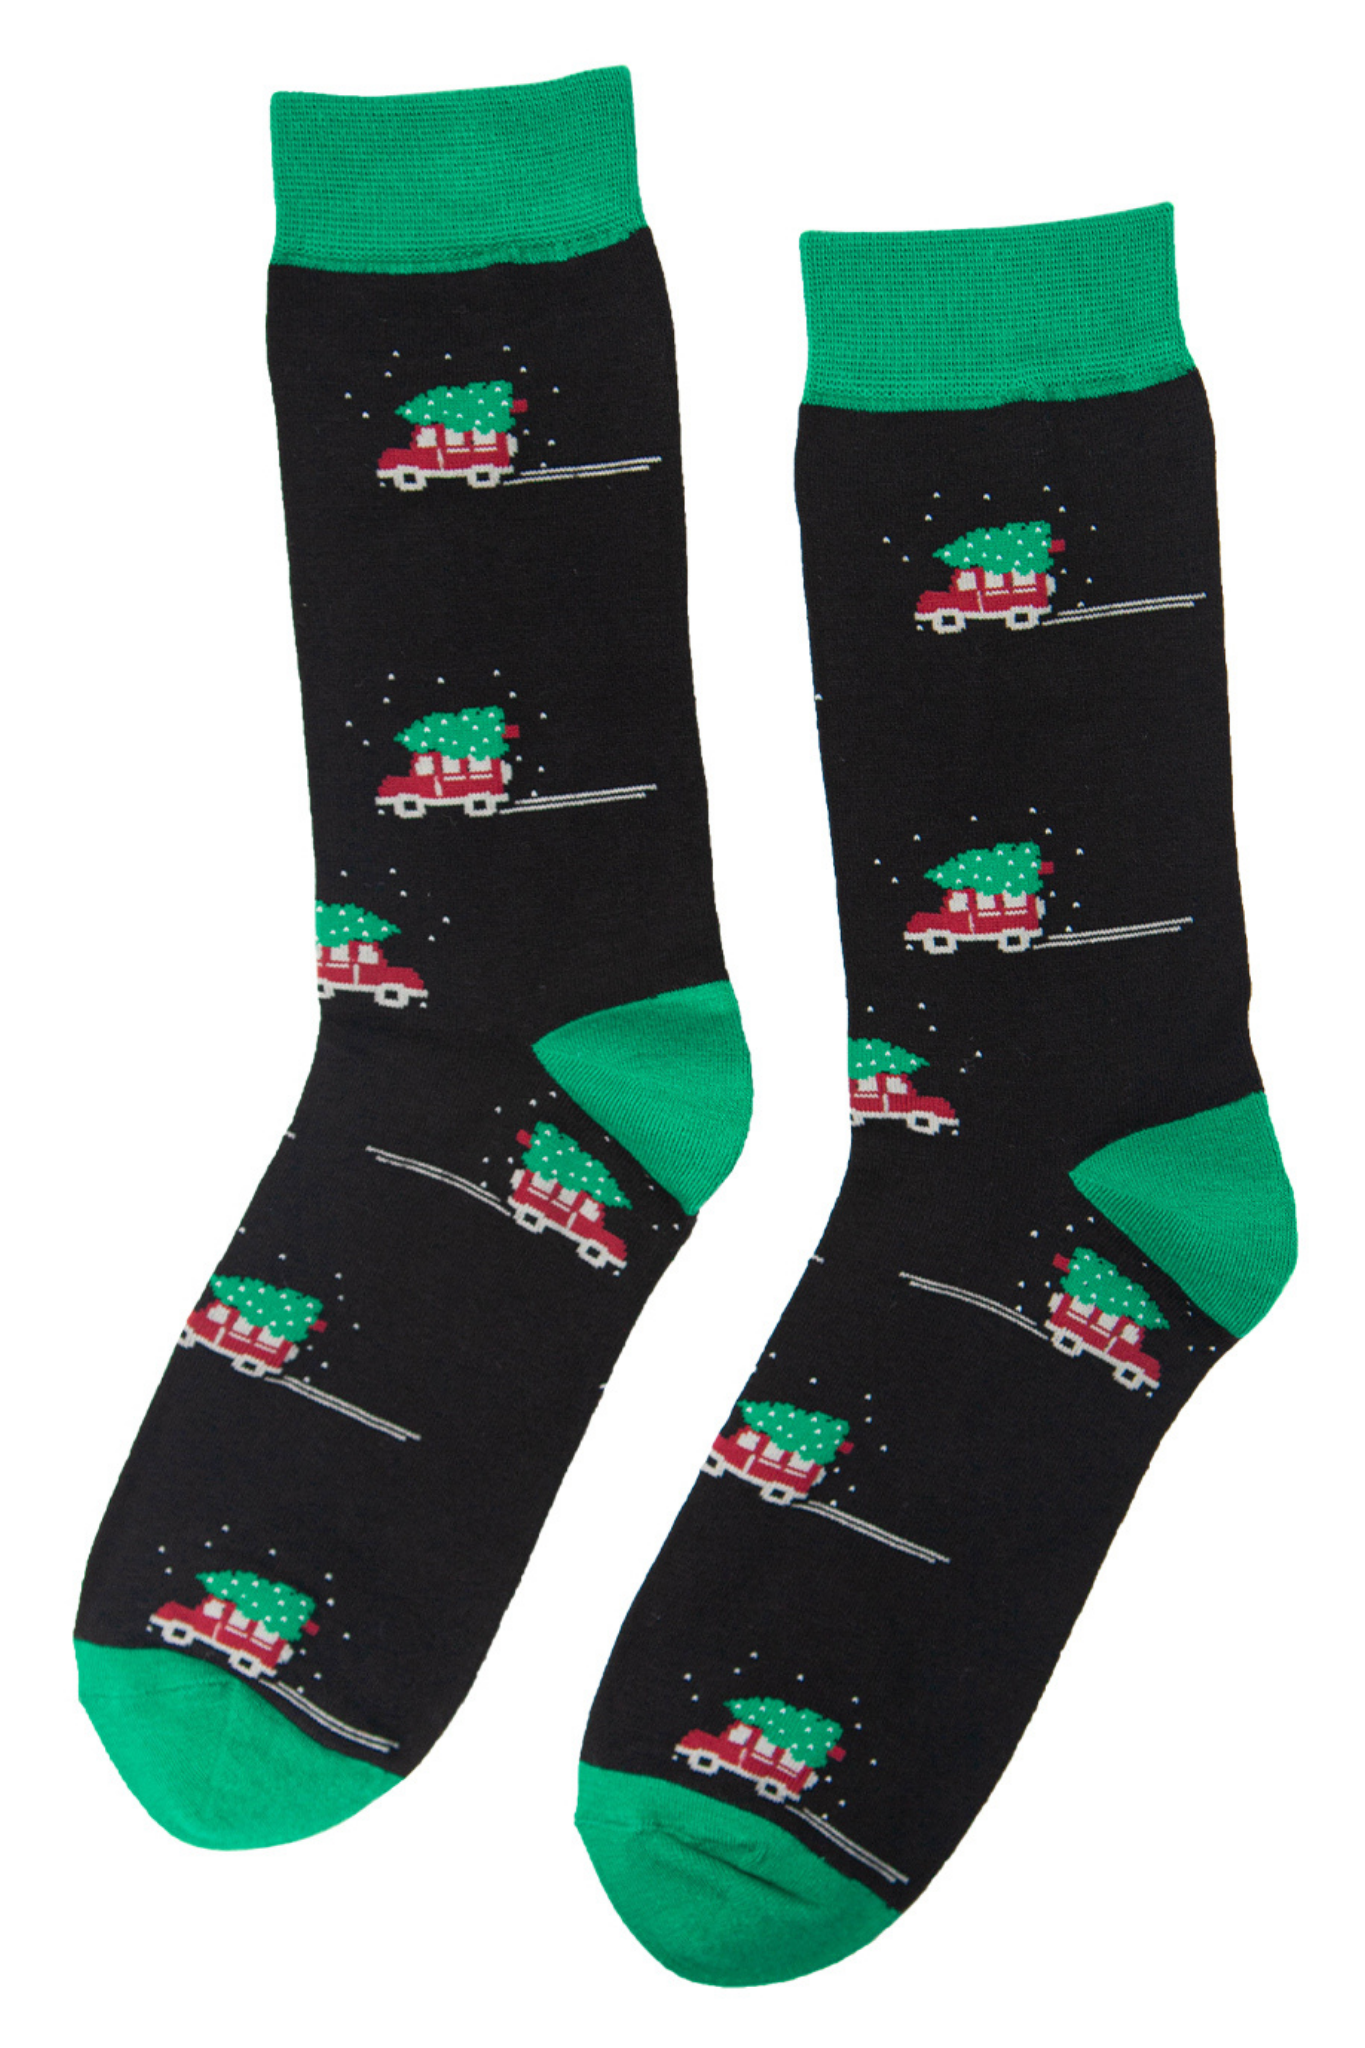 black bamboo socks with green toe, heel and trim ith all over pattern of jeeps carrying xmas trees